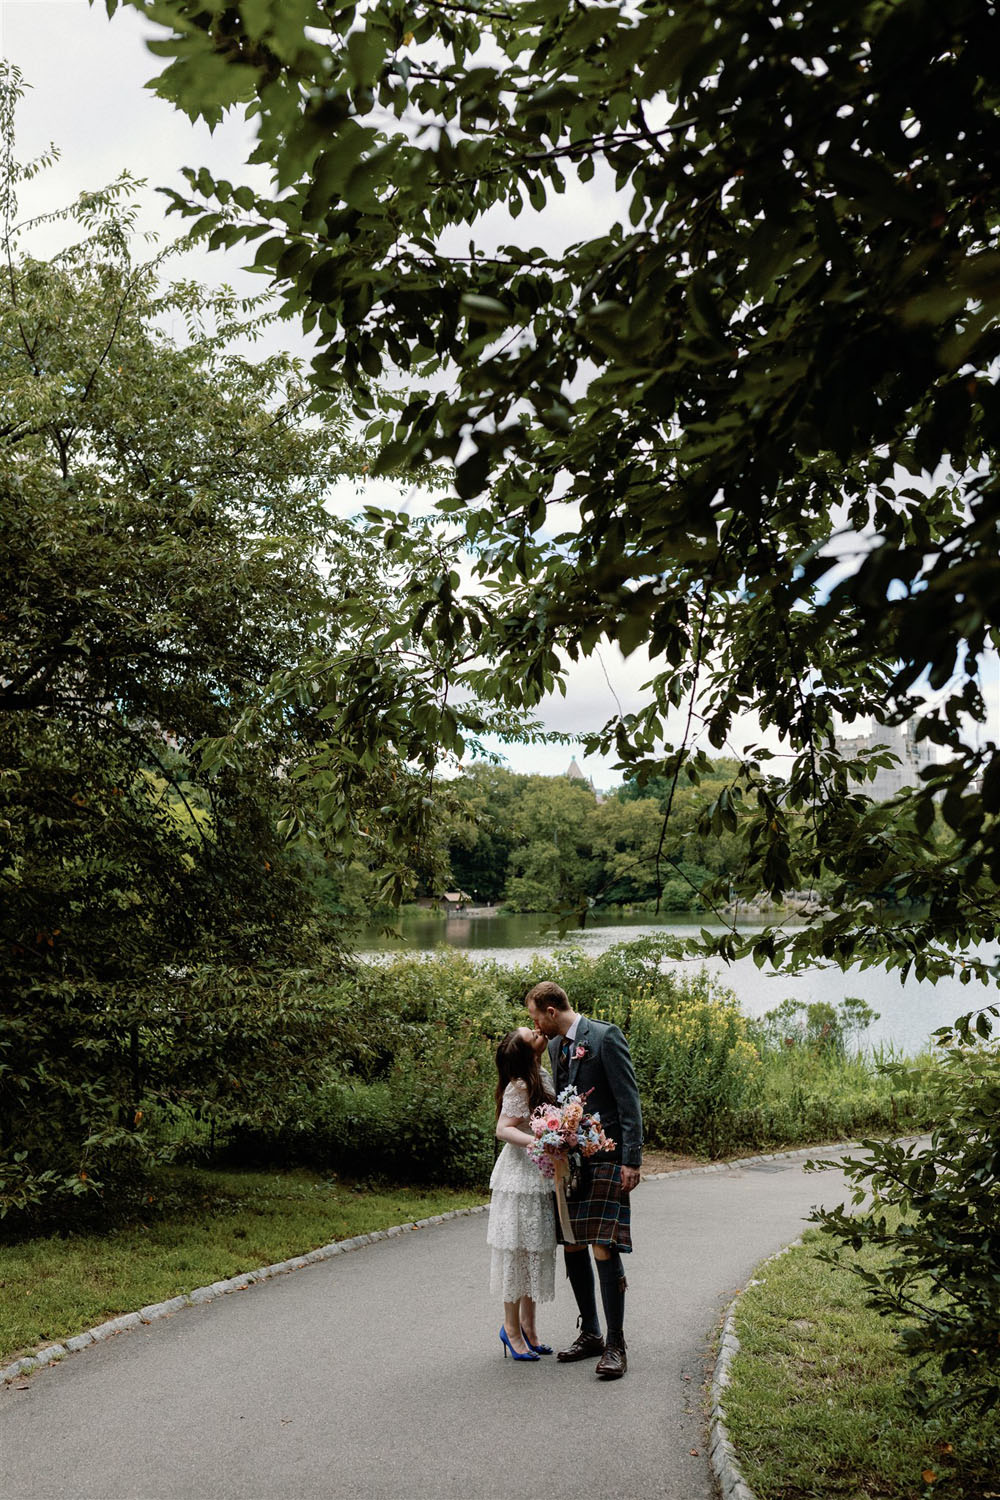 How to plan an NYC elopement from out of town